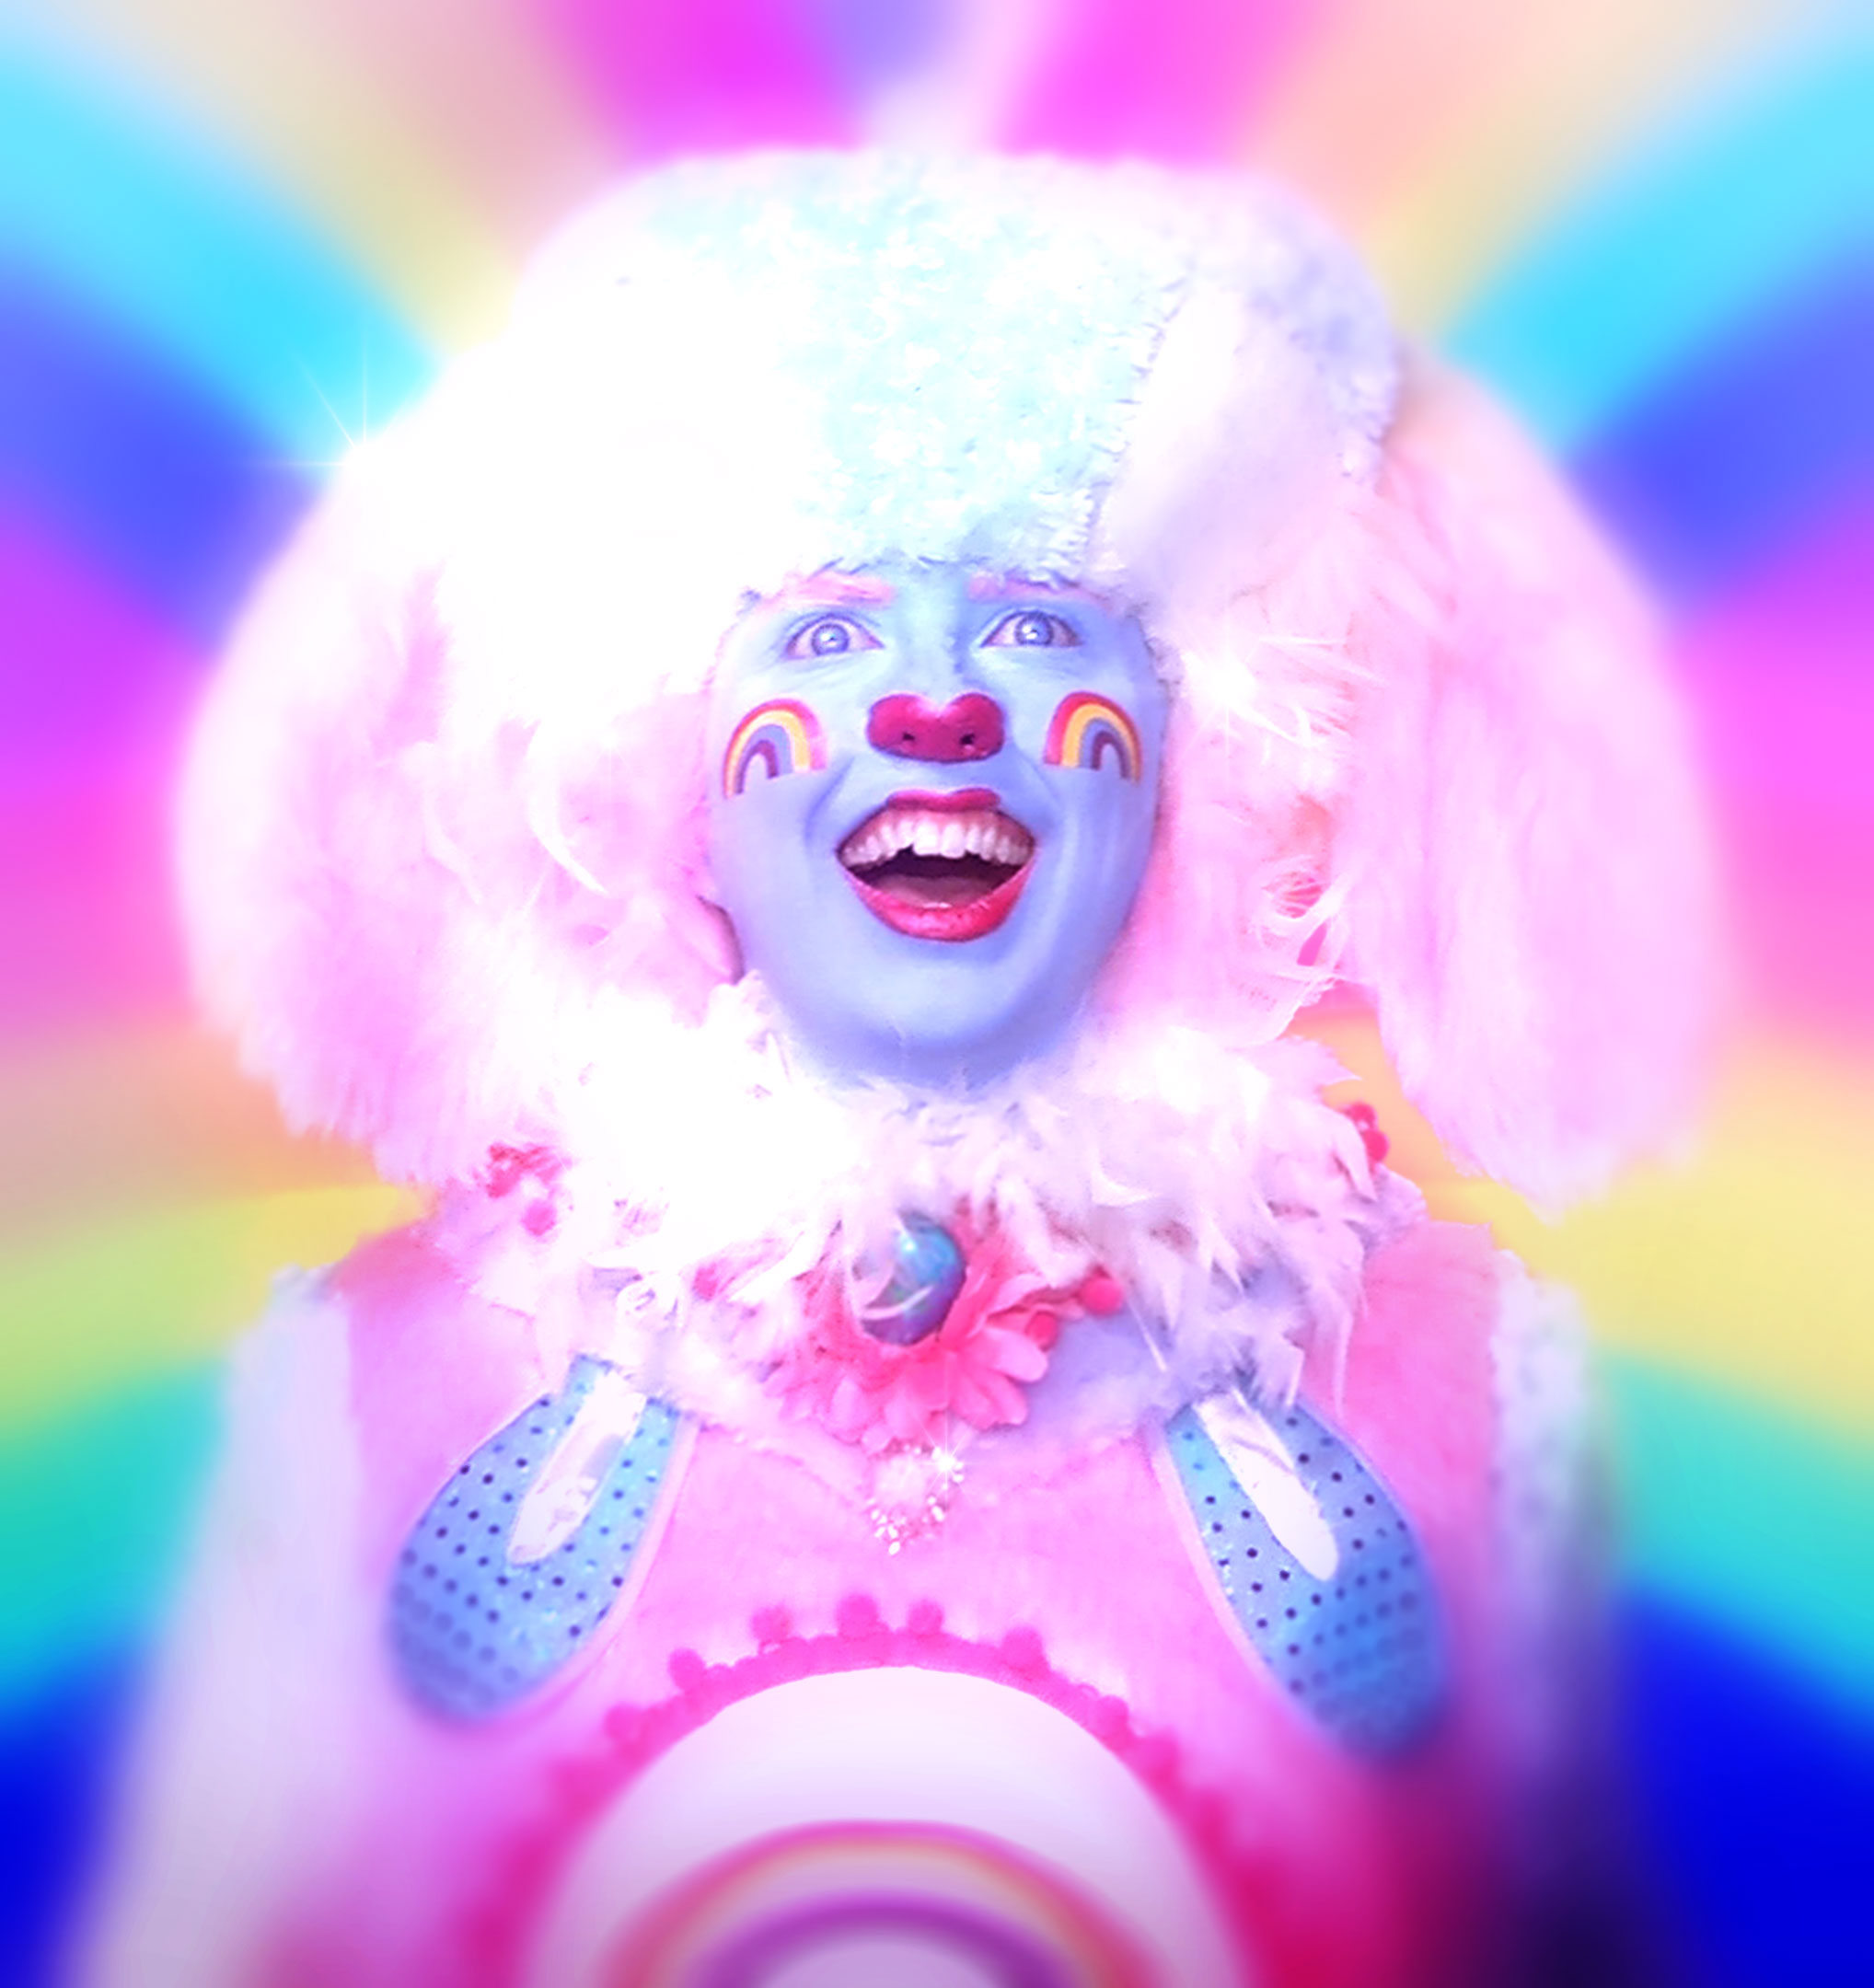 Rachel Maclean, Still from Over The Rainbow, 2013, Digital Video, 45mins, Commissioned by The Banff Centre and Collective Gallery, Funded by Creative Scotland